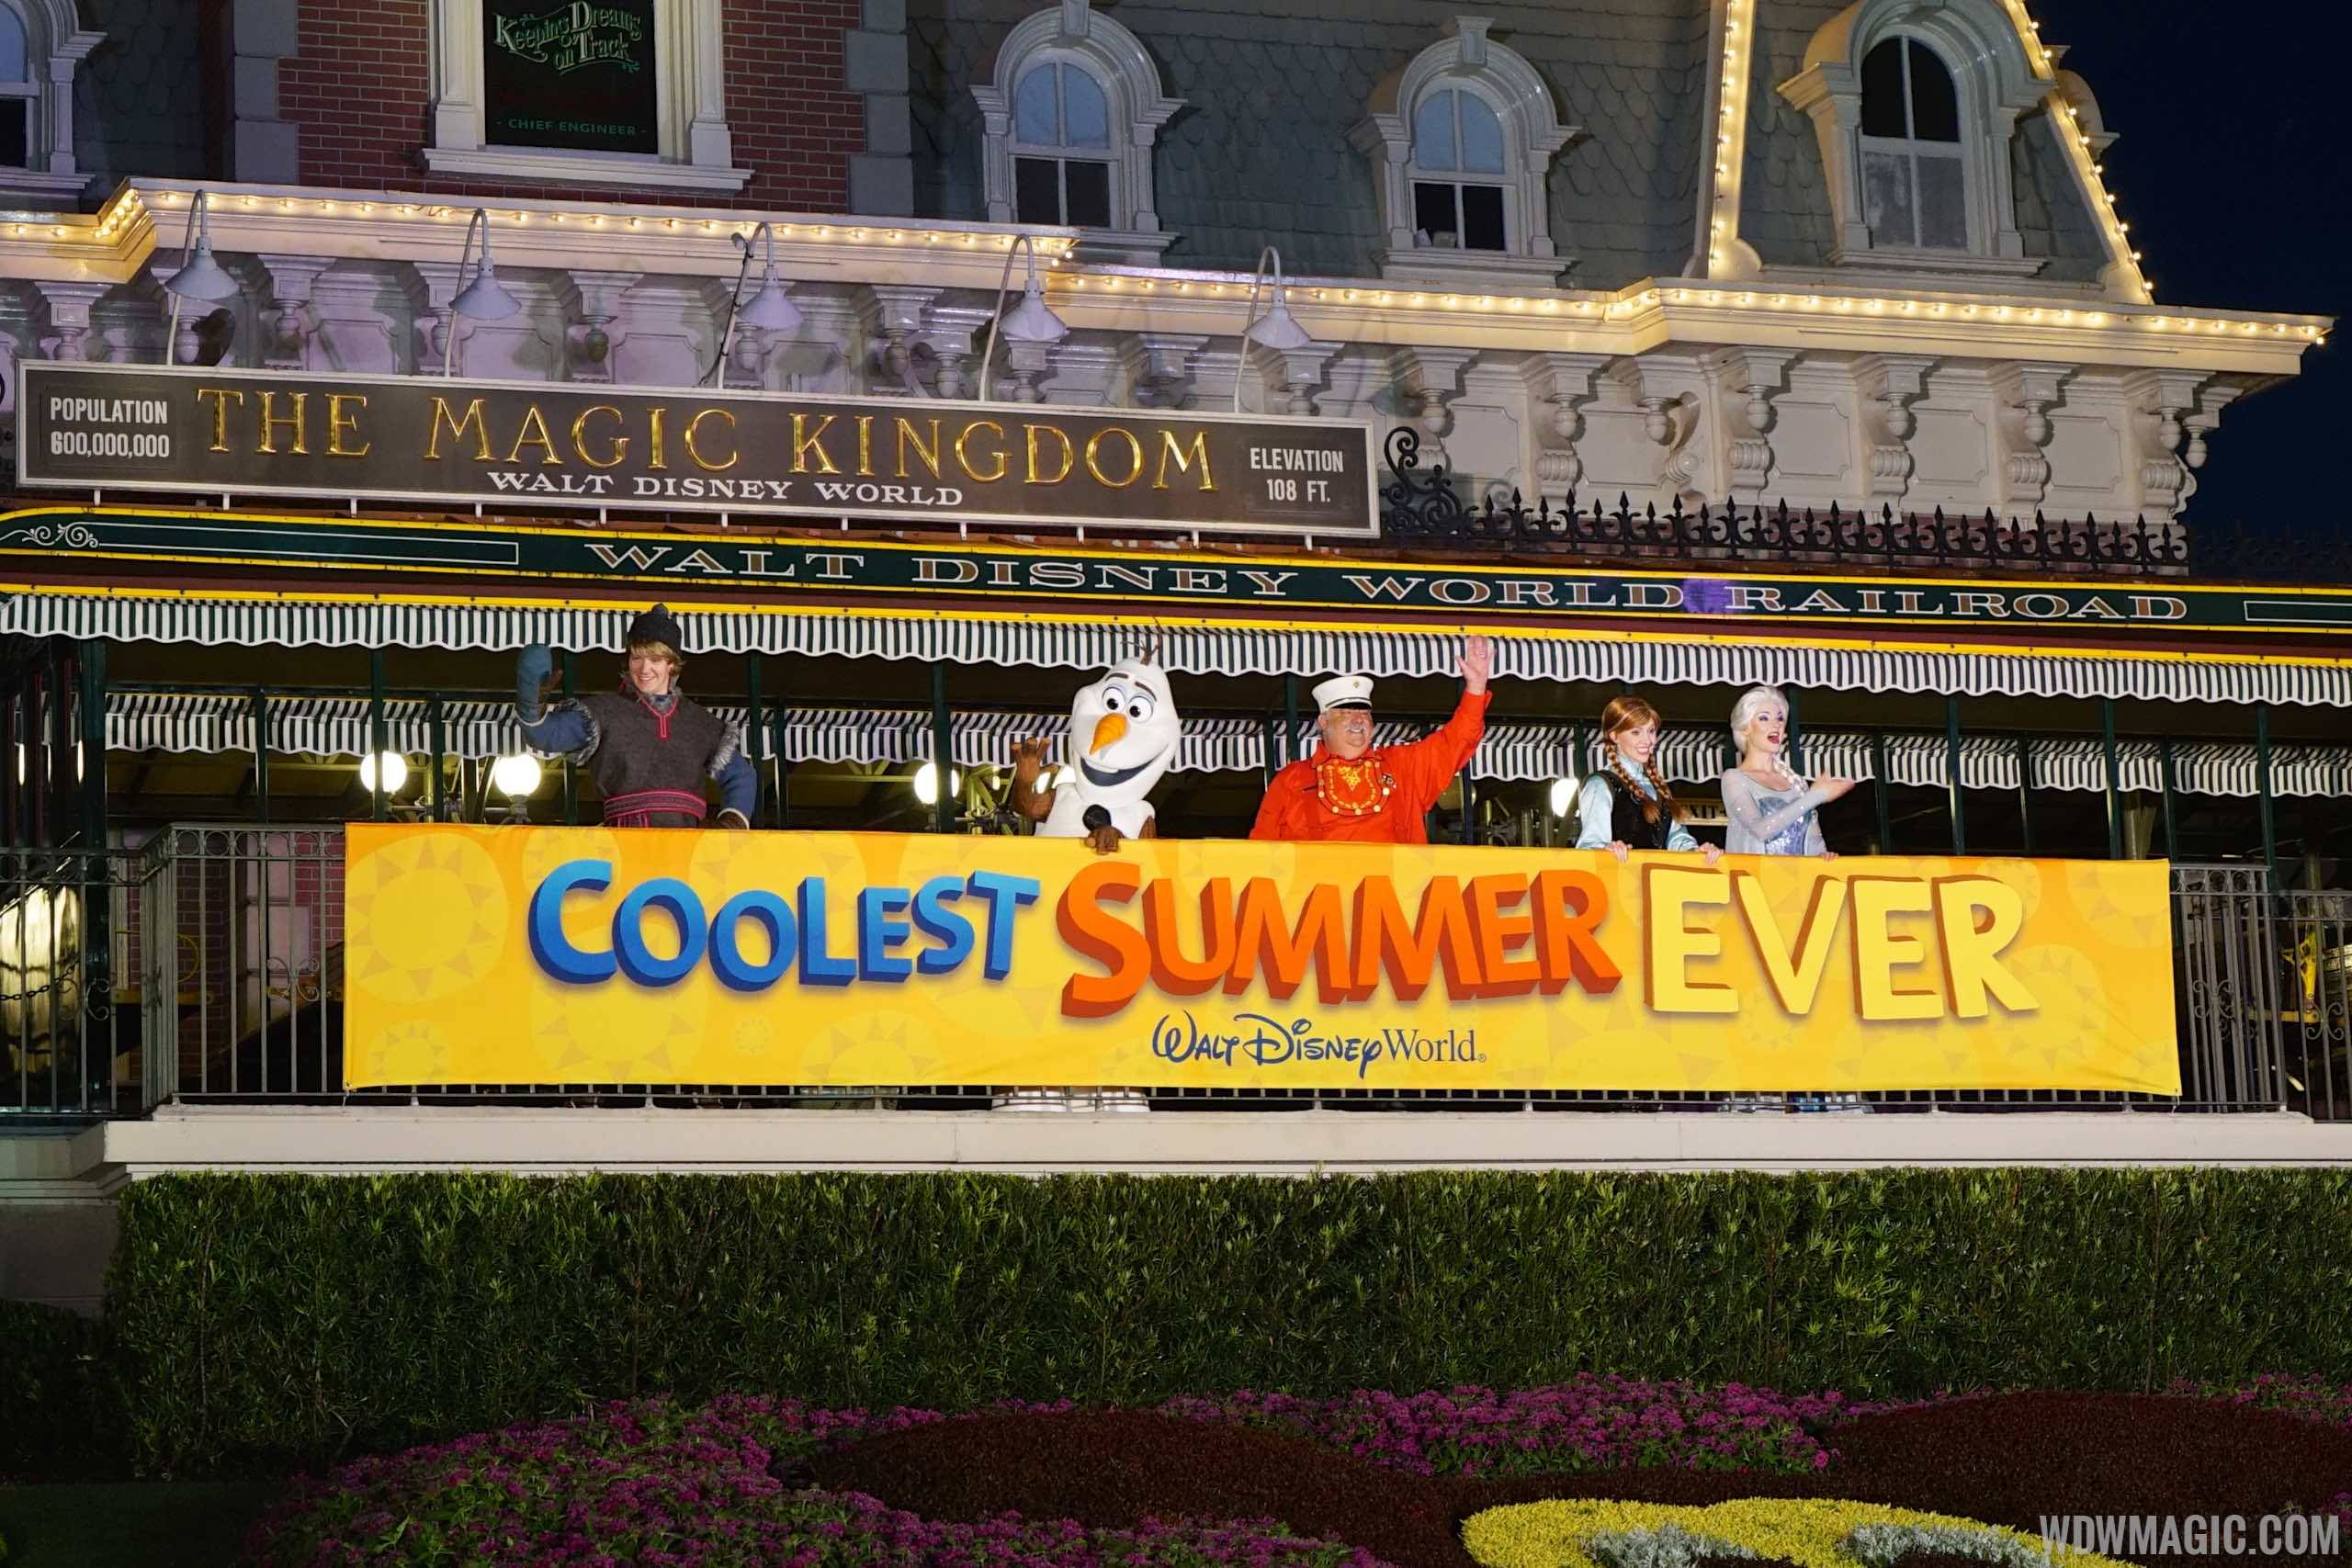 VIDEO - Anna, Elsa, Olaf and Kristoff welcome guests to the Magic Kingdom 24 hour 'Coolest Summer Ever' event